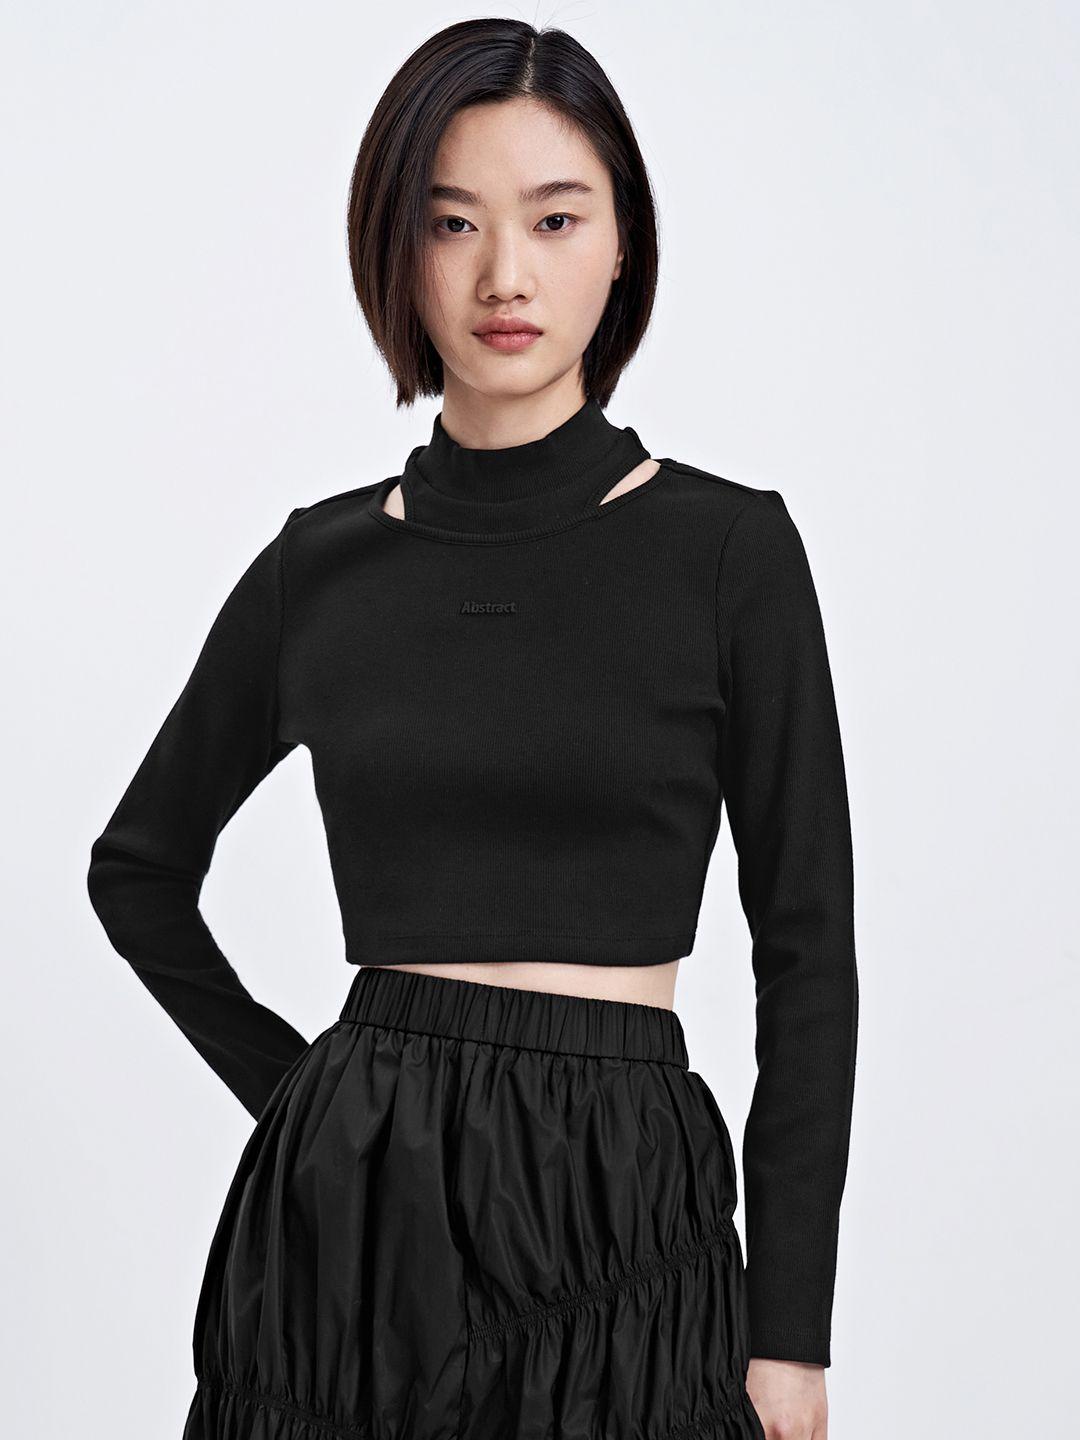 urban-revivo-high-neck-cut-out-detail-long-sleeves-fitted-crop-top